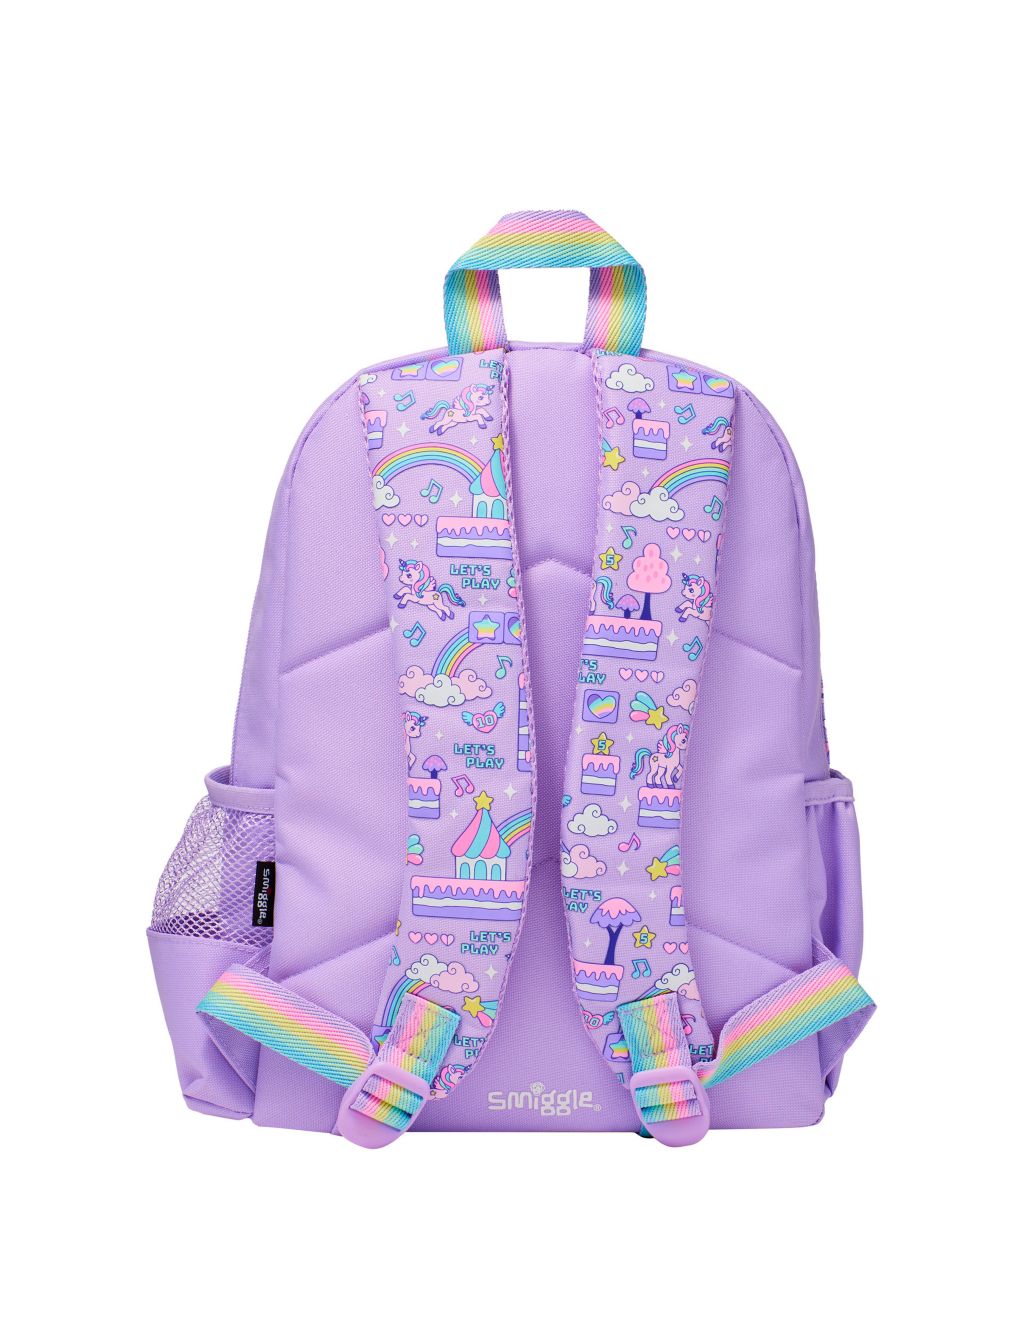 Kids' Space Backpack (3+ Yrs) image 2